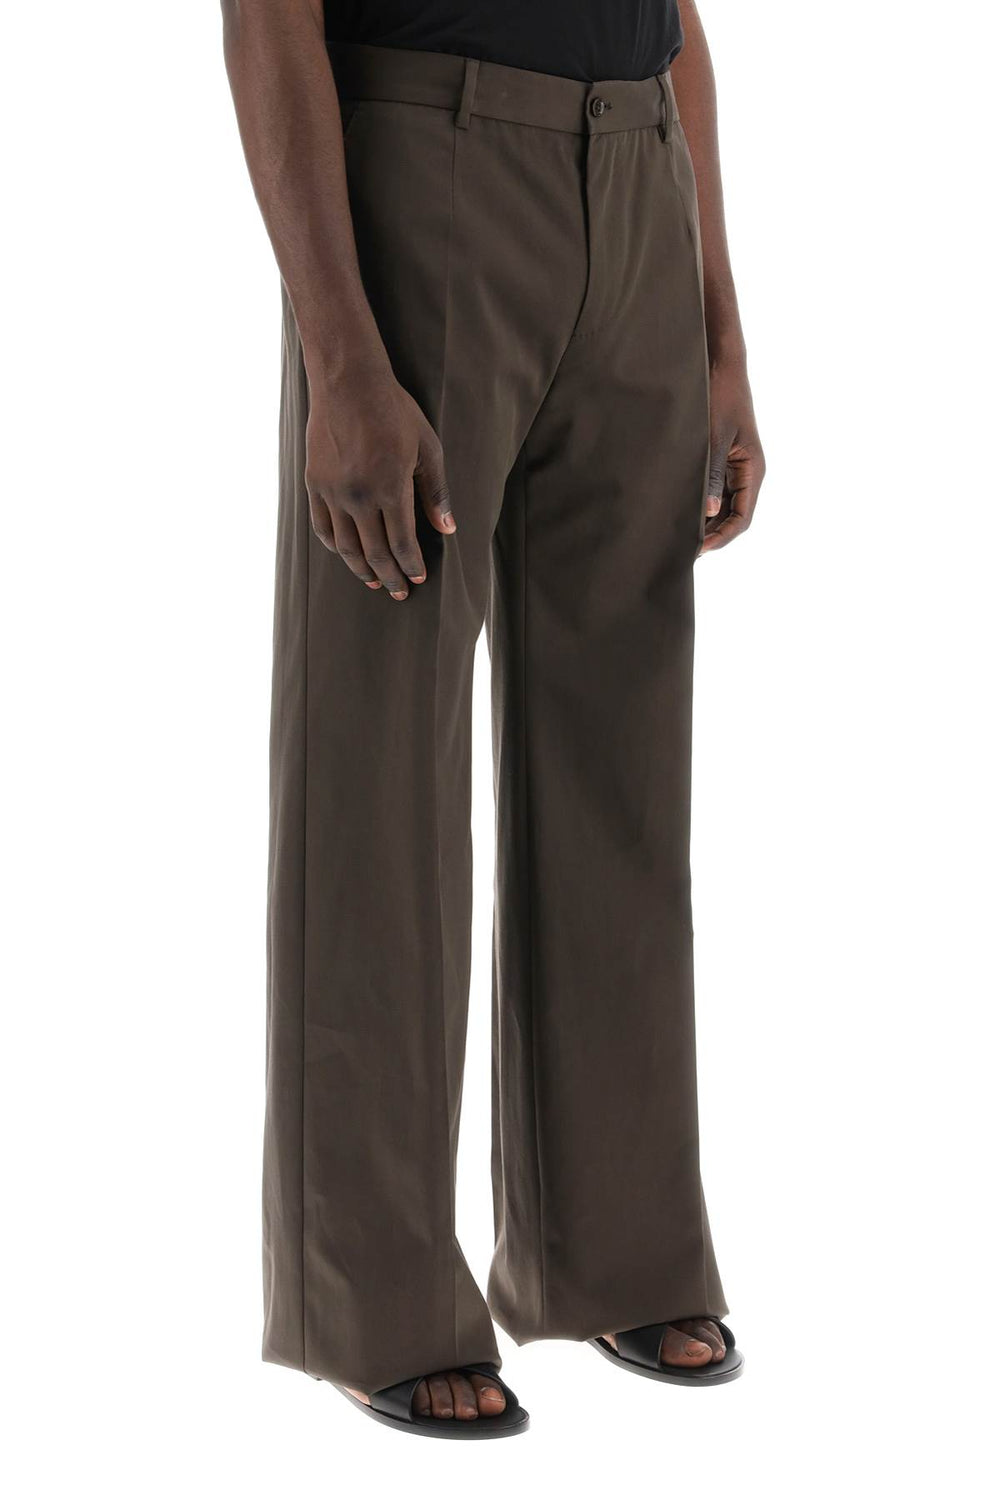 Dolce & gabbana tailored cotton trousers for men-1